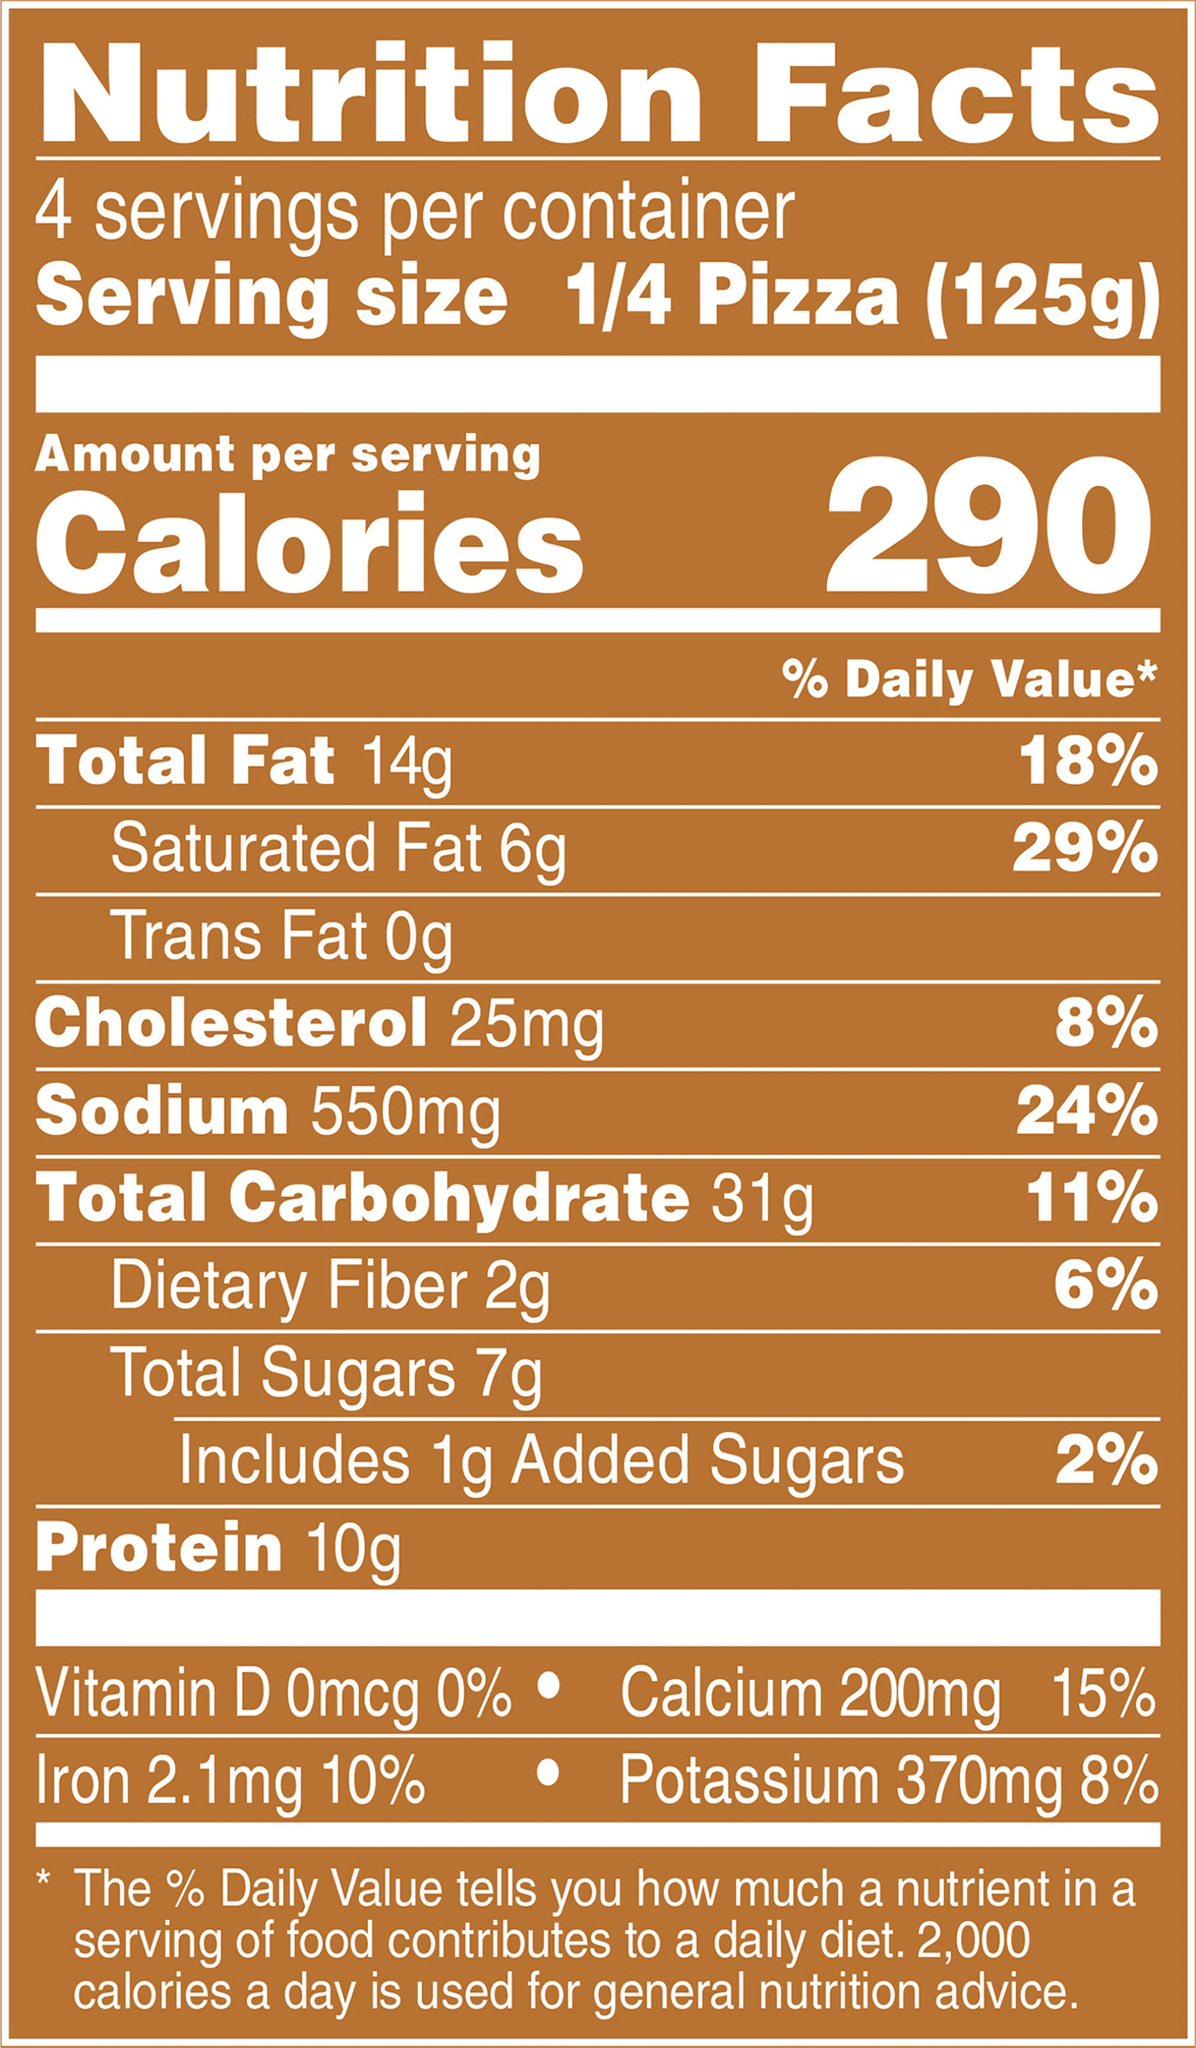 Nutrition Facts % Daily Value: Contribution of a nutrient in a serving of food to a daily diet. General nutrition advice: 2,000 calories per day Serving Size 1/4 Pizza (125g) Servings per Container 4 Calories 290 Total Fat 14g 18% Saturated Fat 6g 29% Trans Fat 0g Cholesterol 25mg 8% Sodium 550mg 24% Total Carb 31g 11% Dietary Fiber 2g 6% Total Sugars 7g Added Sugars 1g 2% Protein 10g Vitamin D 0mcg 0% Calcium 200mg 15% Iron 2.1mg 10% Potassium 370mg 8%